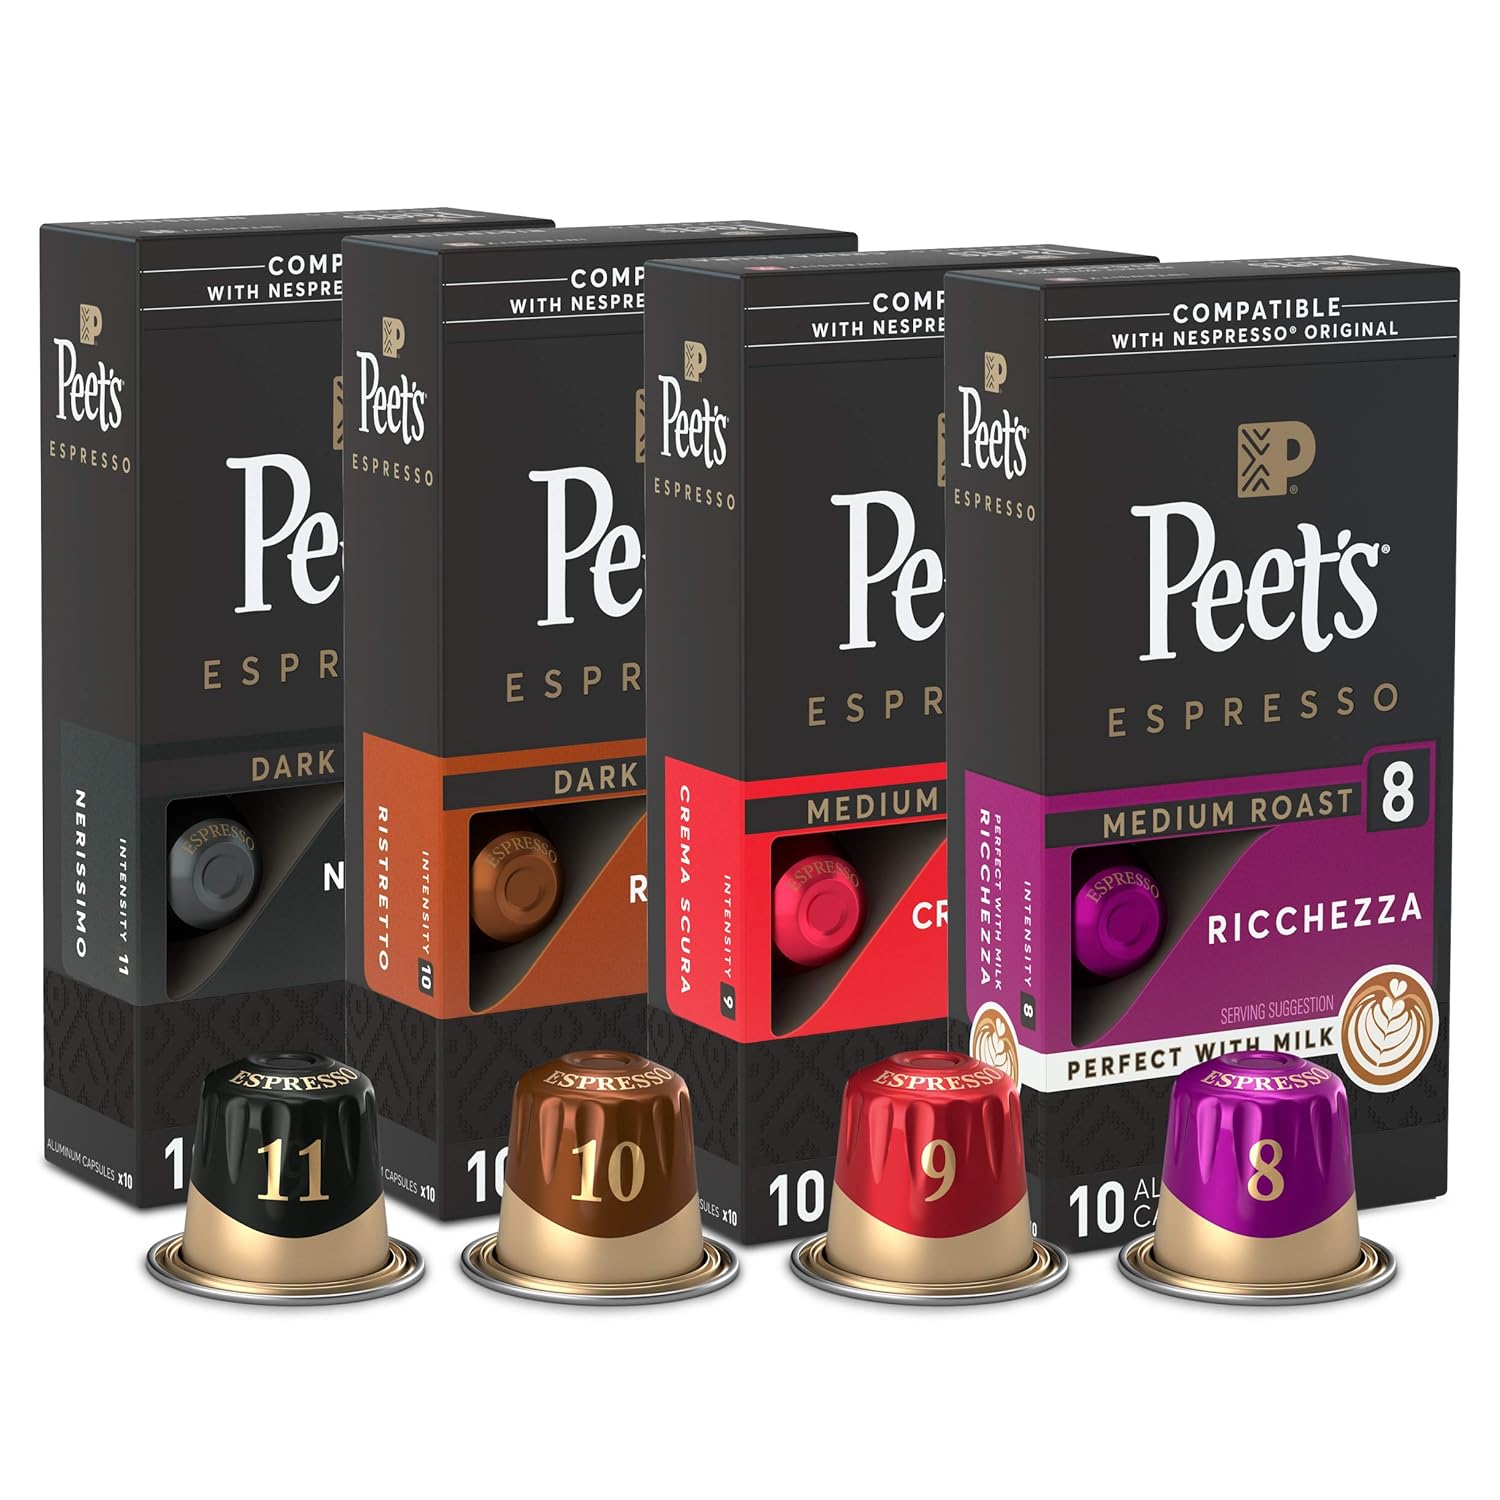 Peet' Coffee Gifts, Espresso Coffee Pods Variety Pack, Dark & Medium Roasts, Compatible with Nespresso Original Machine, Intensity 8-11, 40 Count (4 Boxes of 10 Espresso Capsules)